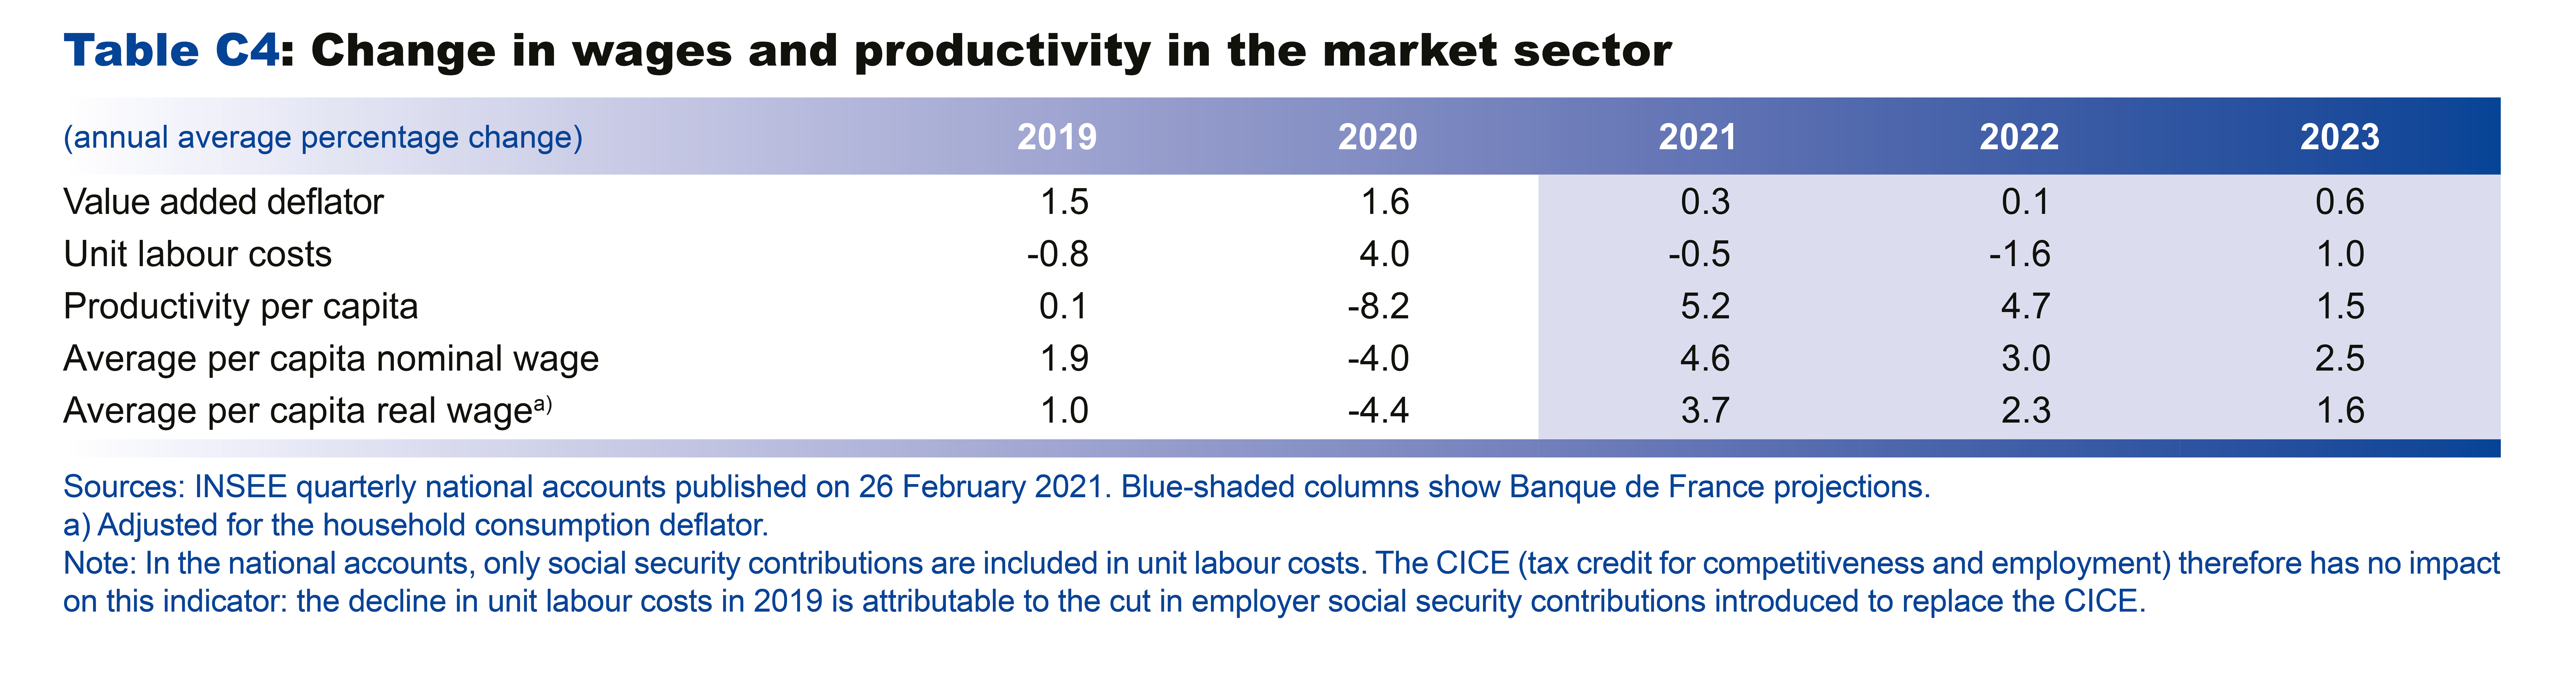 Macroeconomic projections – June 2021 - Change in wages and productivity in the market sector